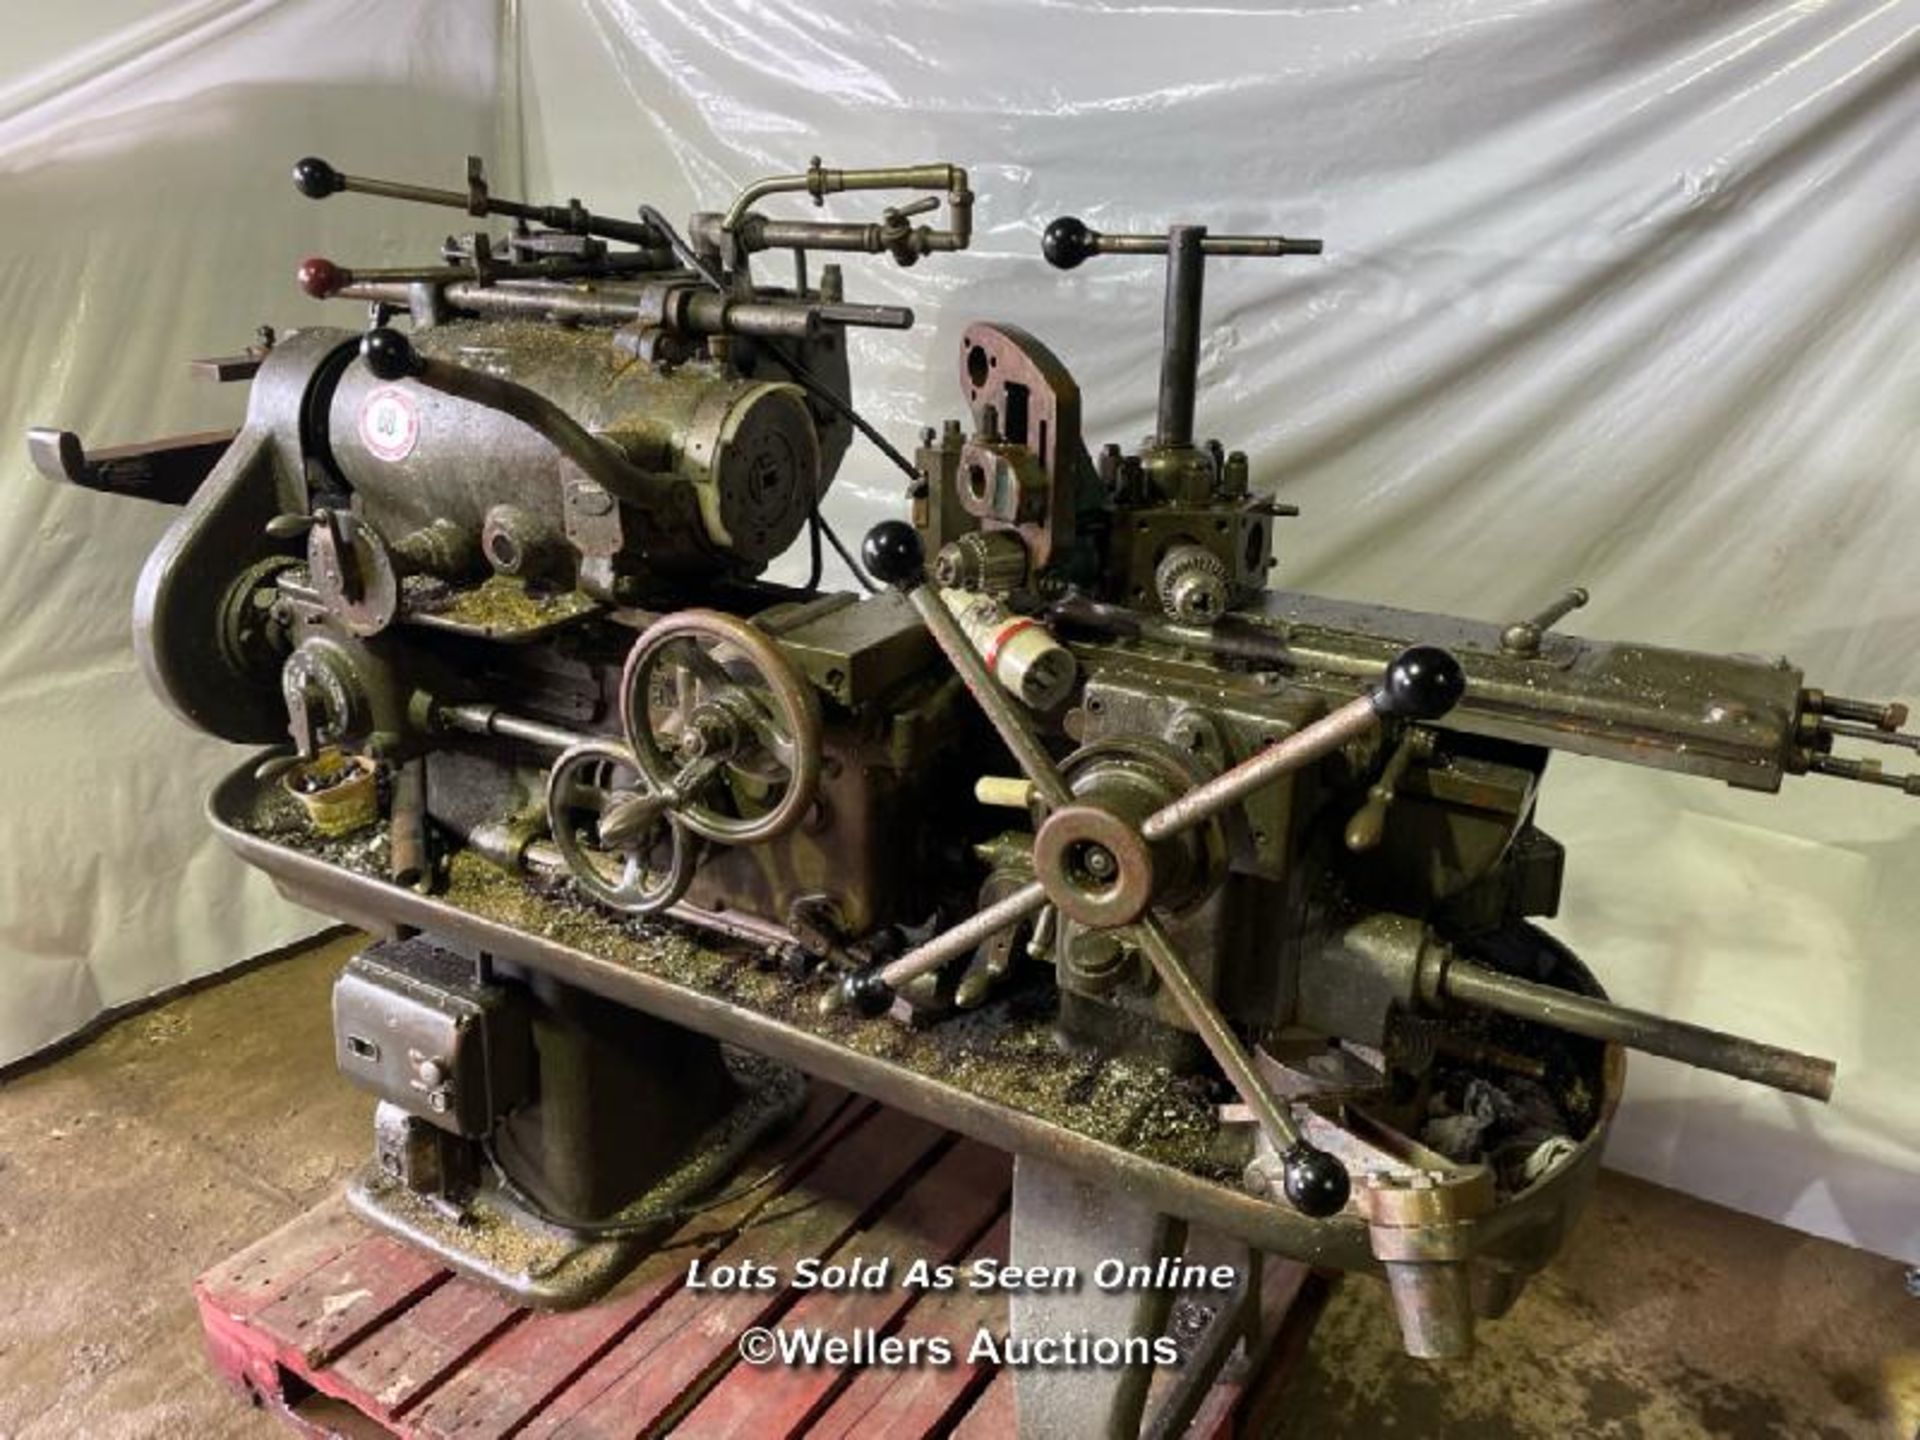 H. W. WARD AND SON CAPSTAN 2A LATHE, 3 PHASE, INCL. 3 JAW CHUCK, IN WORKING ORDER - Bild 2 aus 9